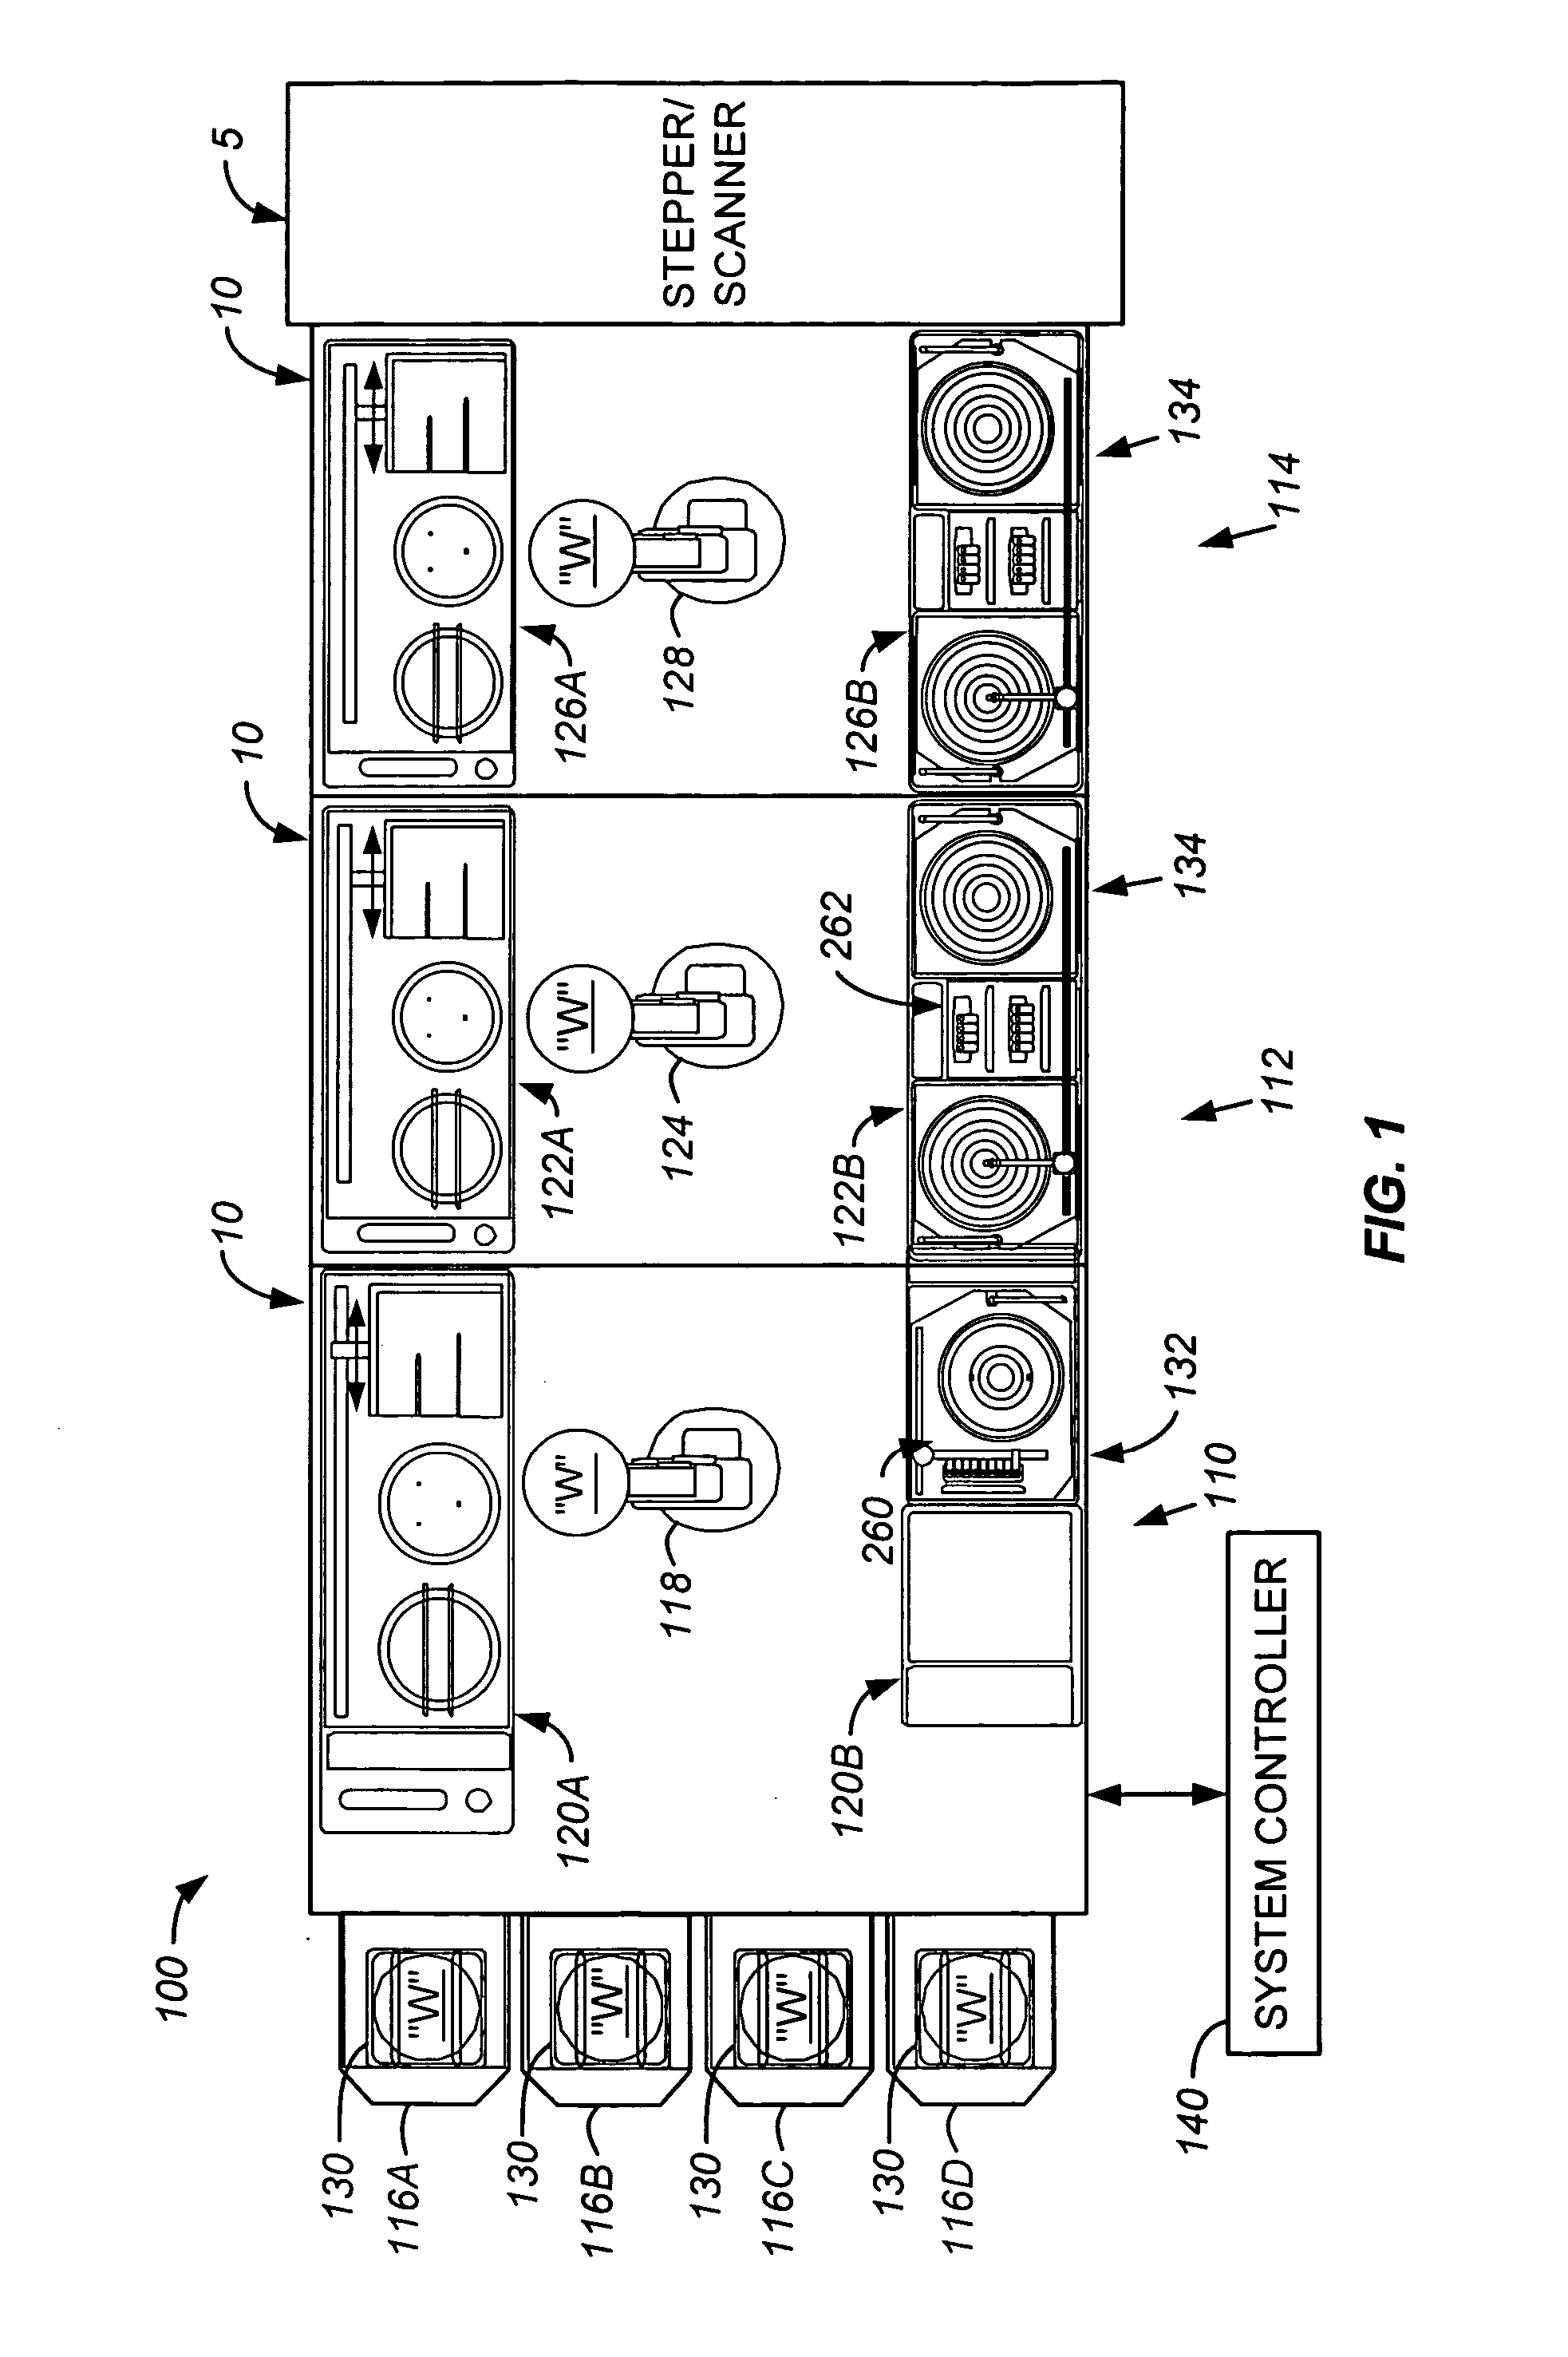 Track lithography system with integrated photoresist pump, filter, and buffer vessel